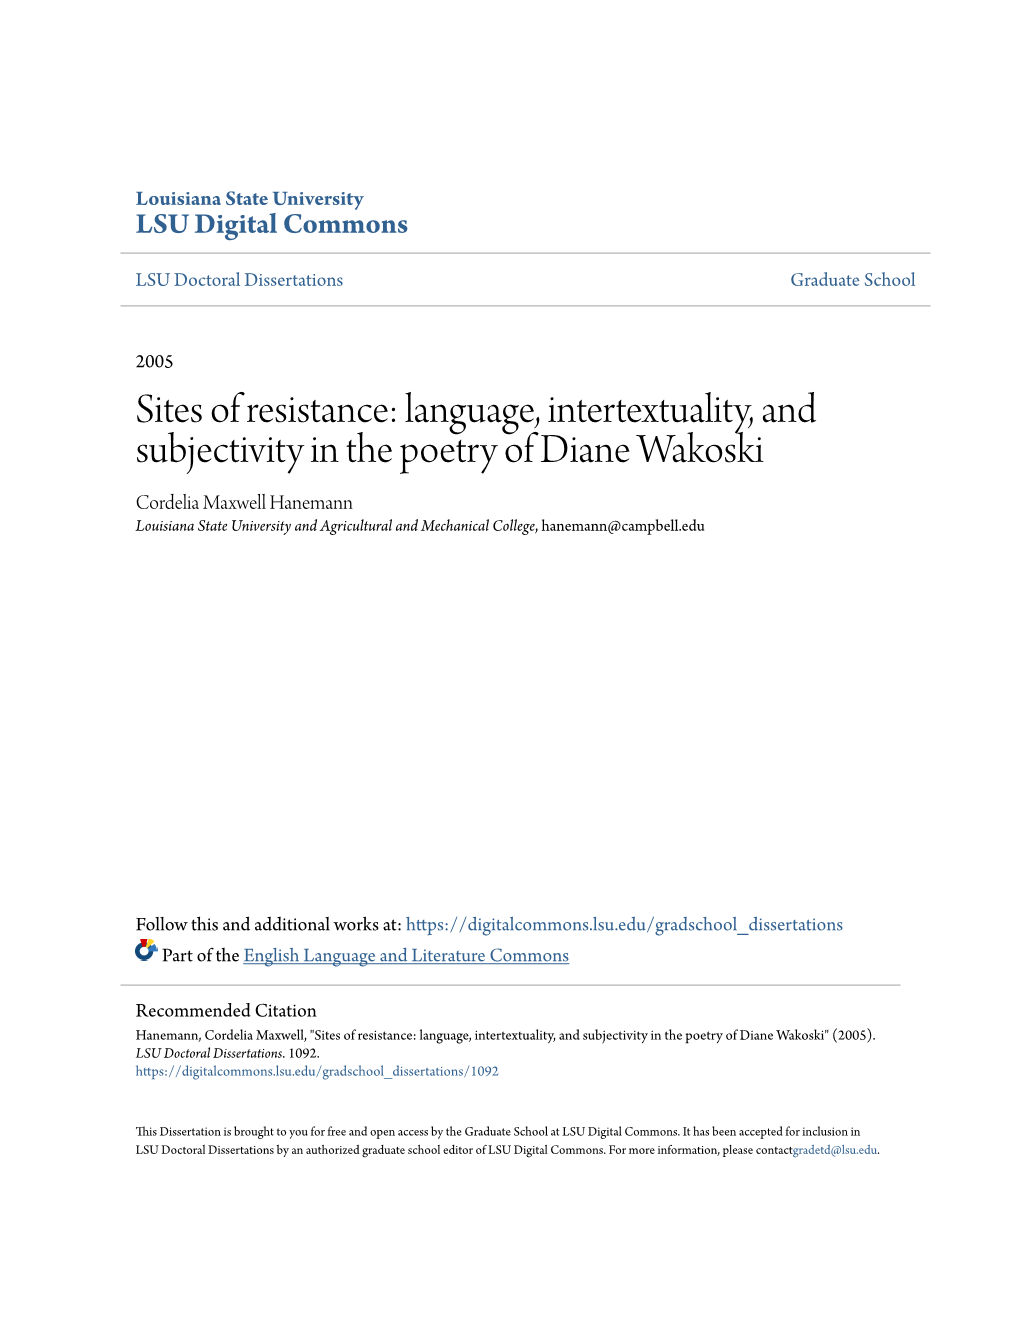 Language, Intertextuality, and Subjectivity in the Poetry of Diane